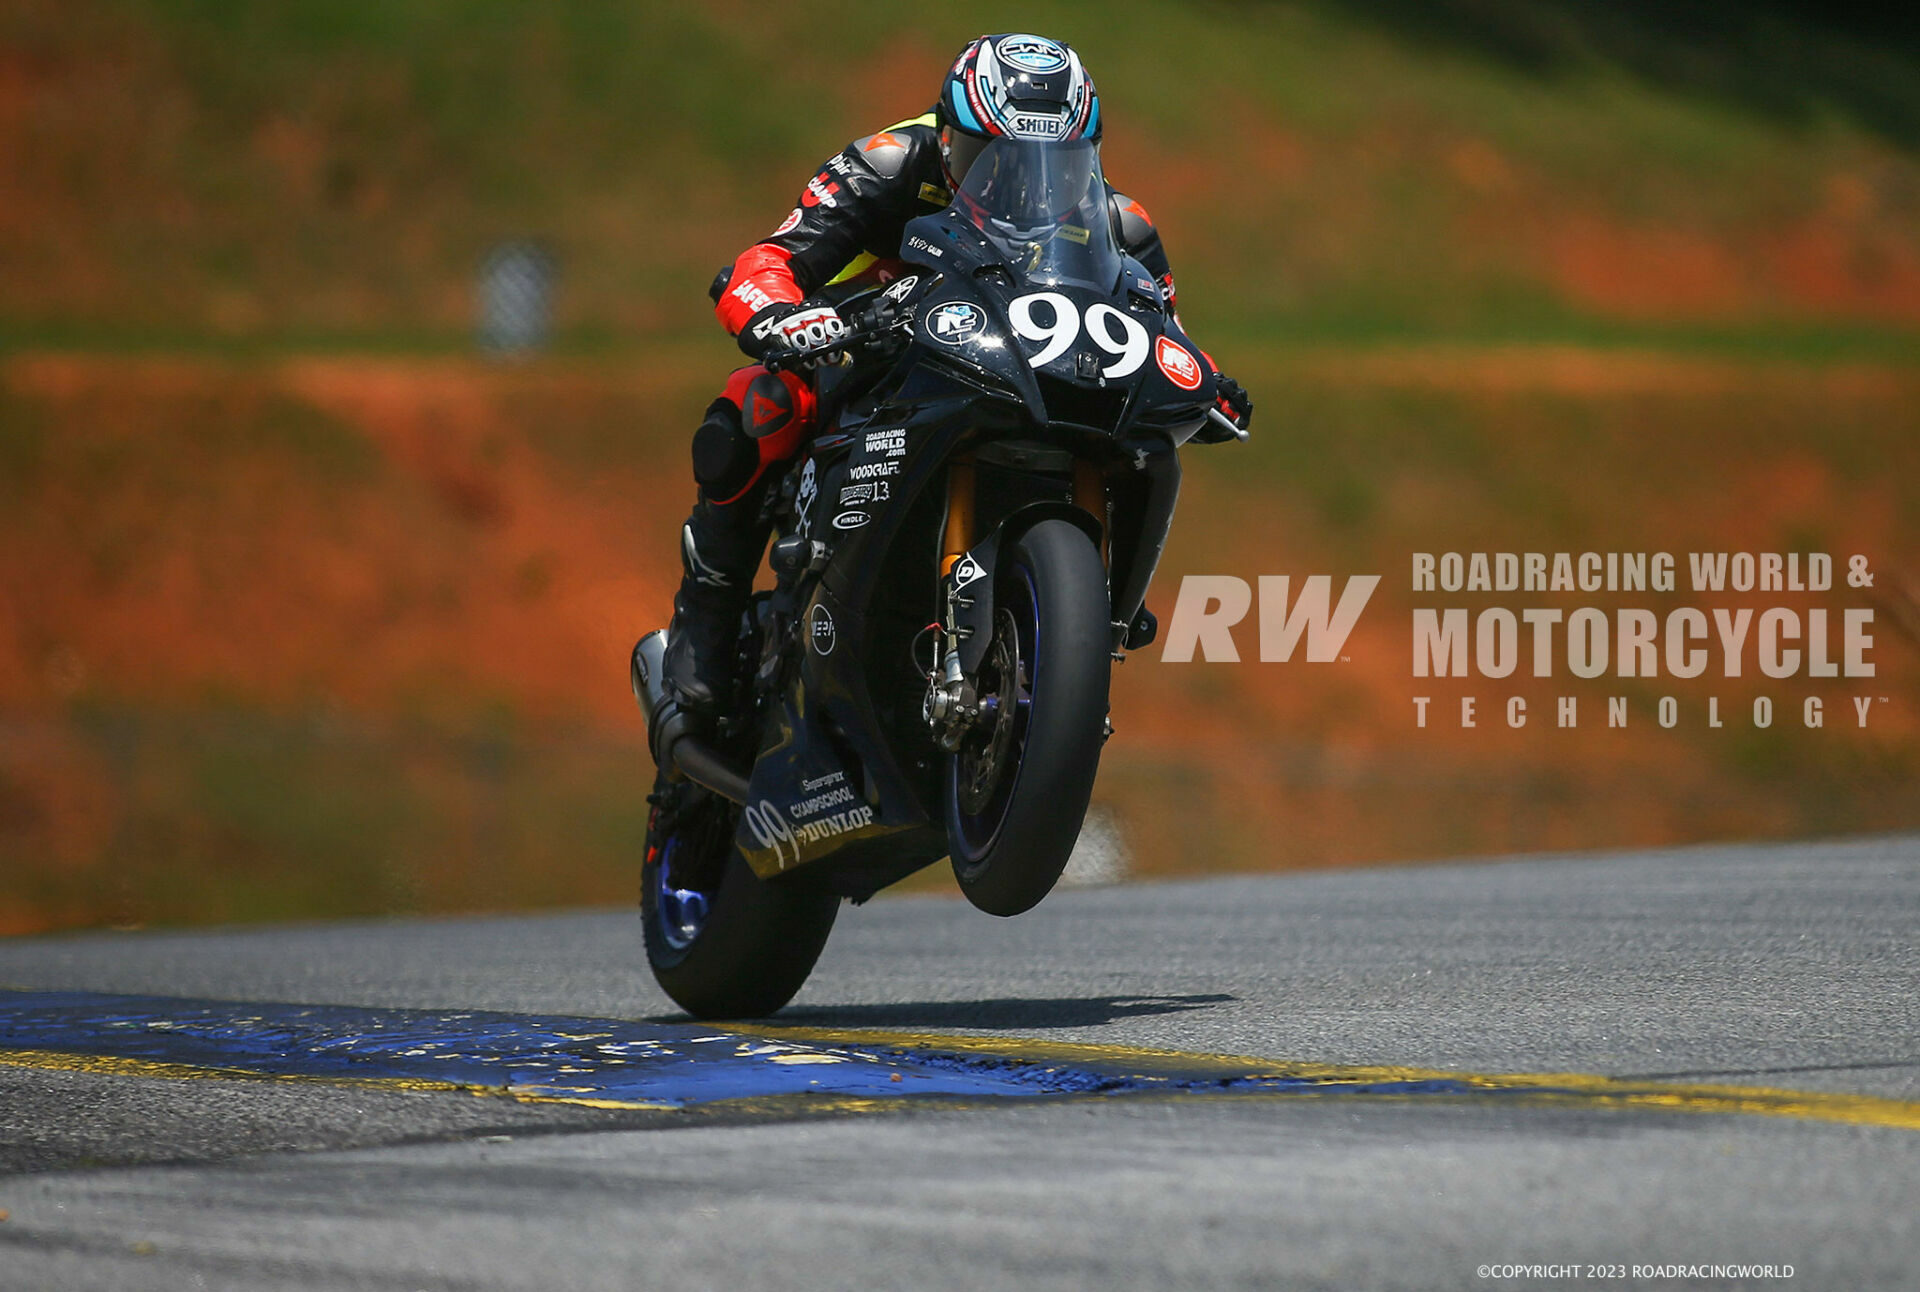 Cody Wyman on the N2 WERA National Endurance Championship-winning Army of Darkness Yamaha YZF-R1. After 4,000+ miles the team took it apart. Raul Jerez/Highside Photo.